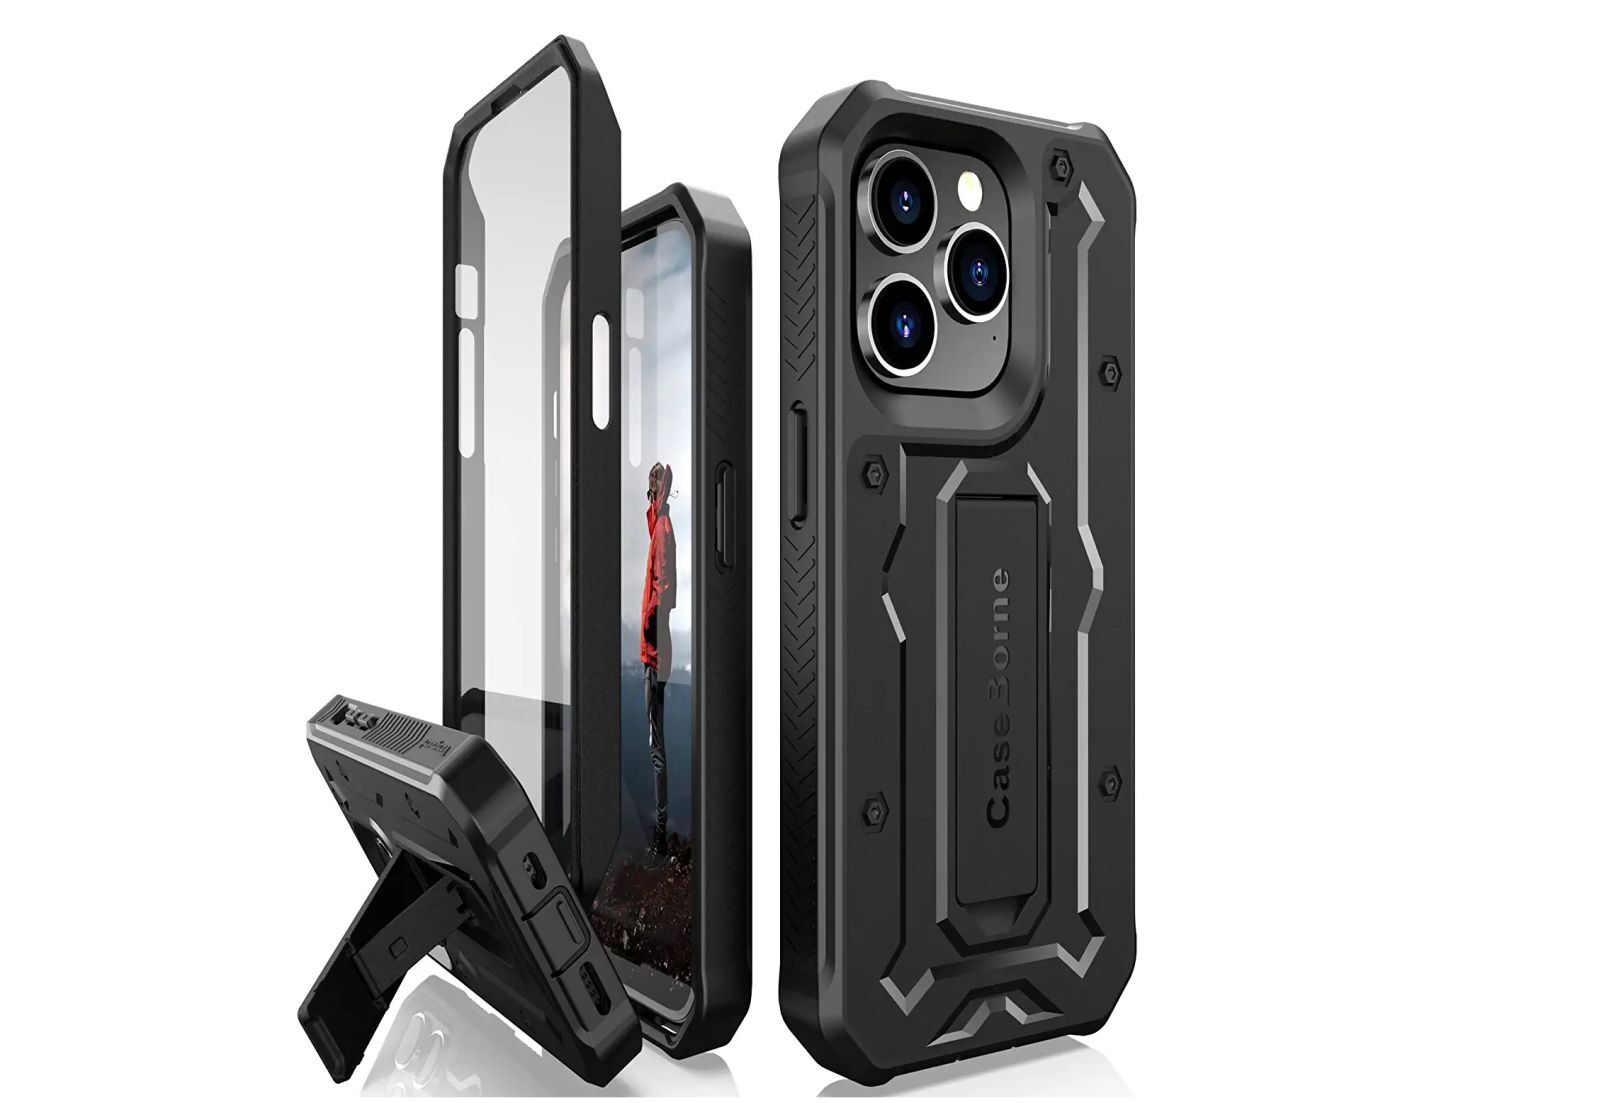 CaseBorne V iPhone 14 Pro case with military-grade protection - Best iPhone 14 Pro cases to get for your new phone